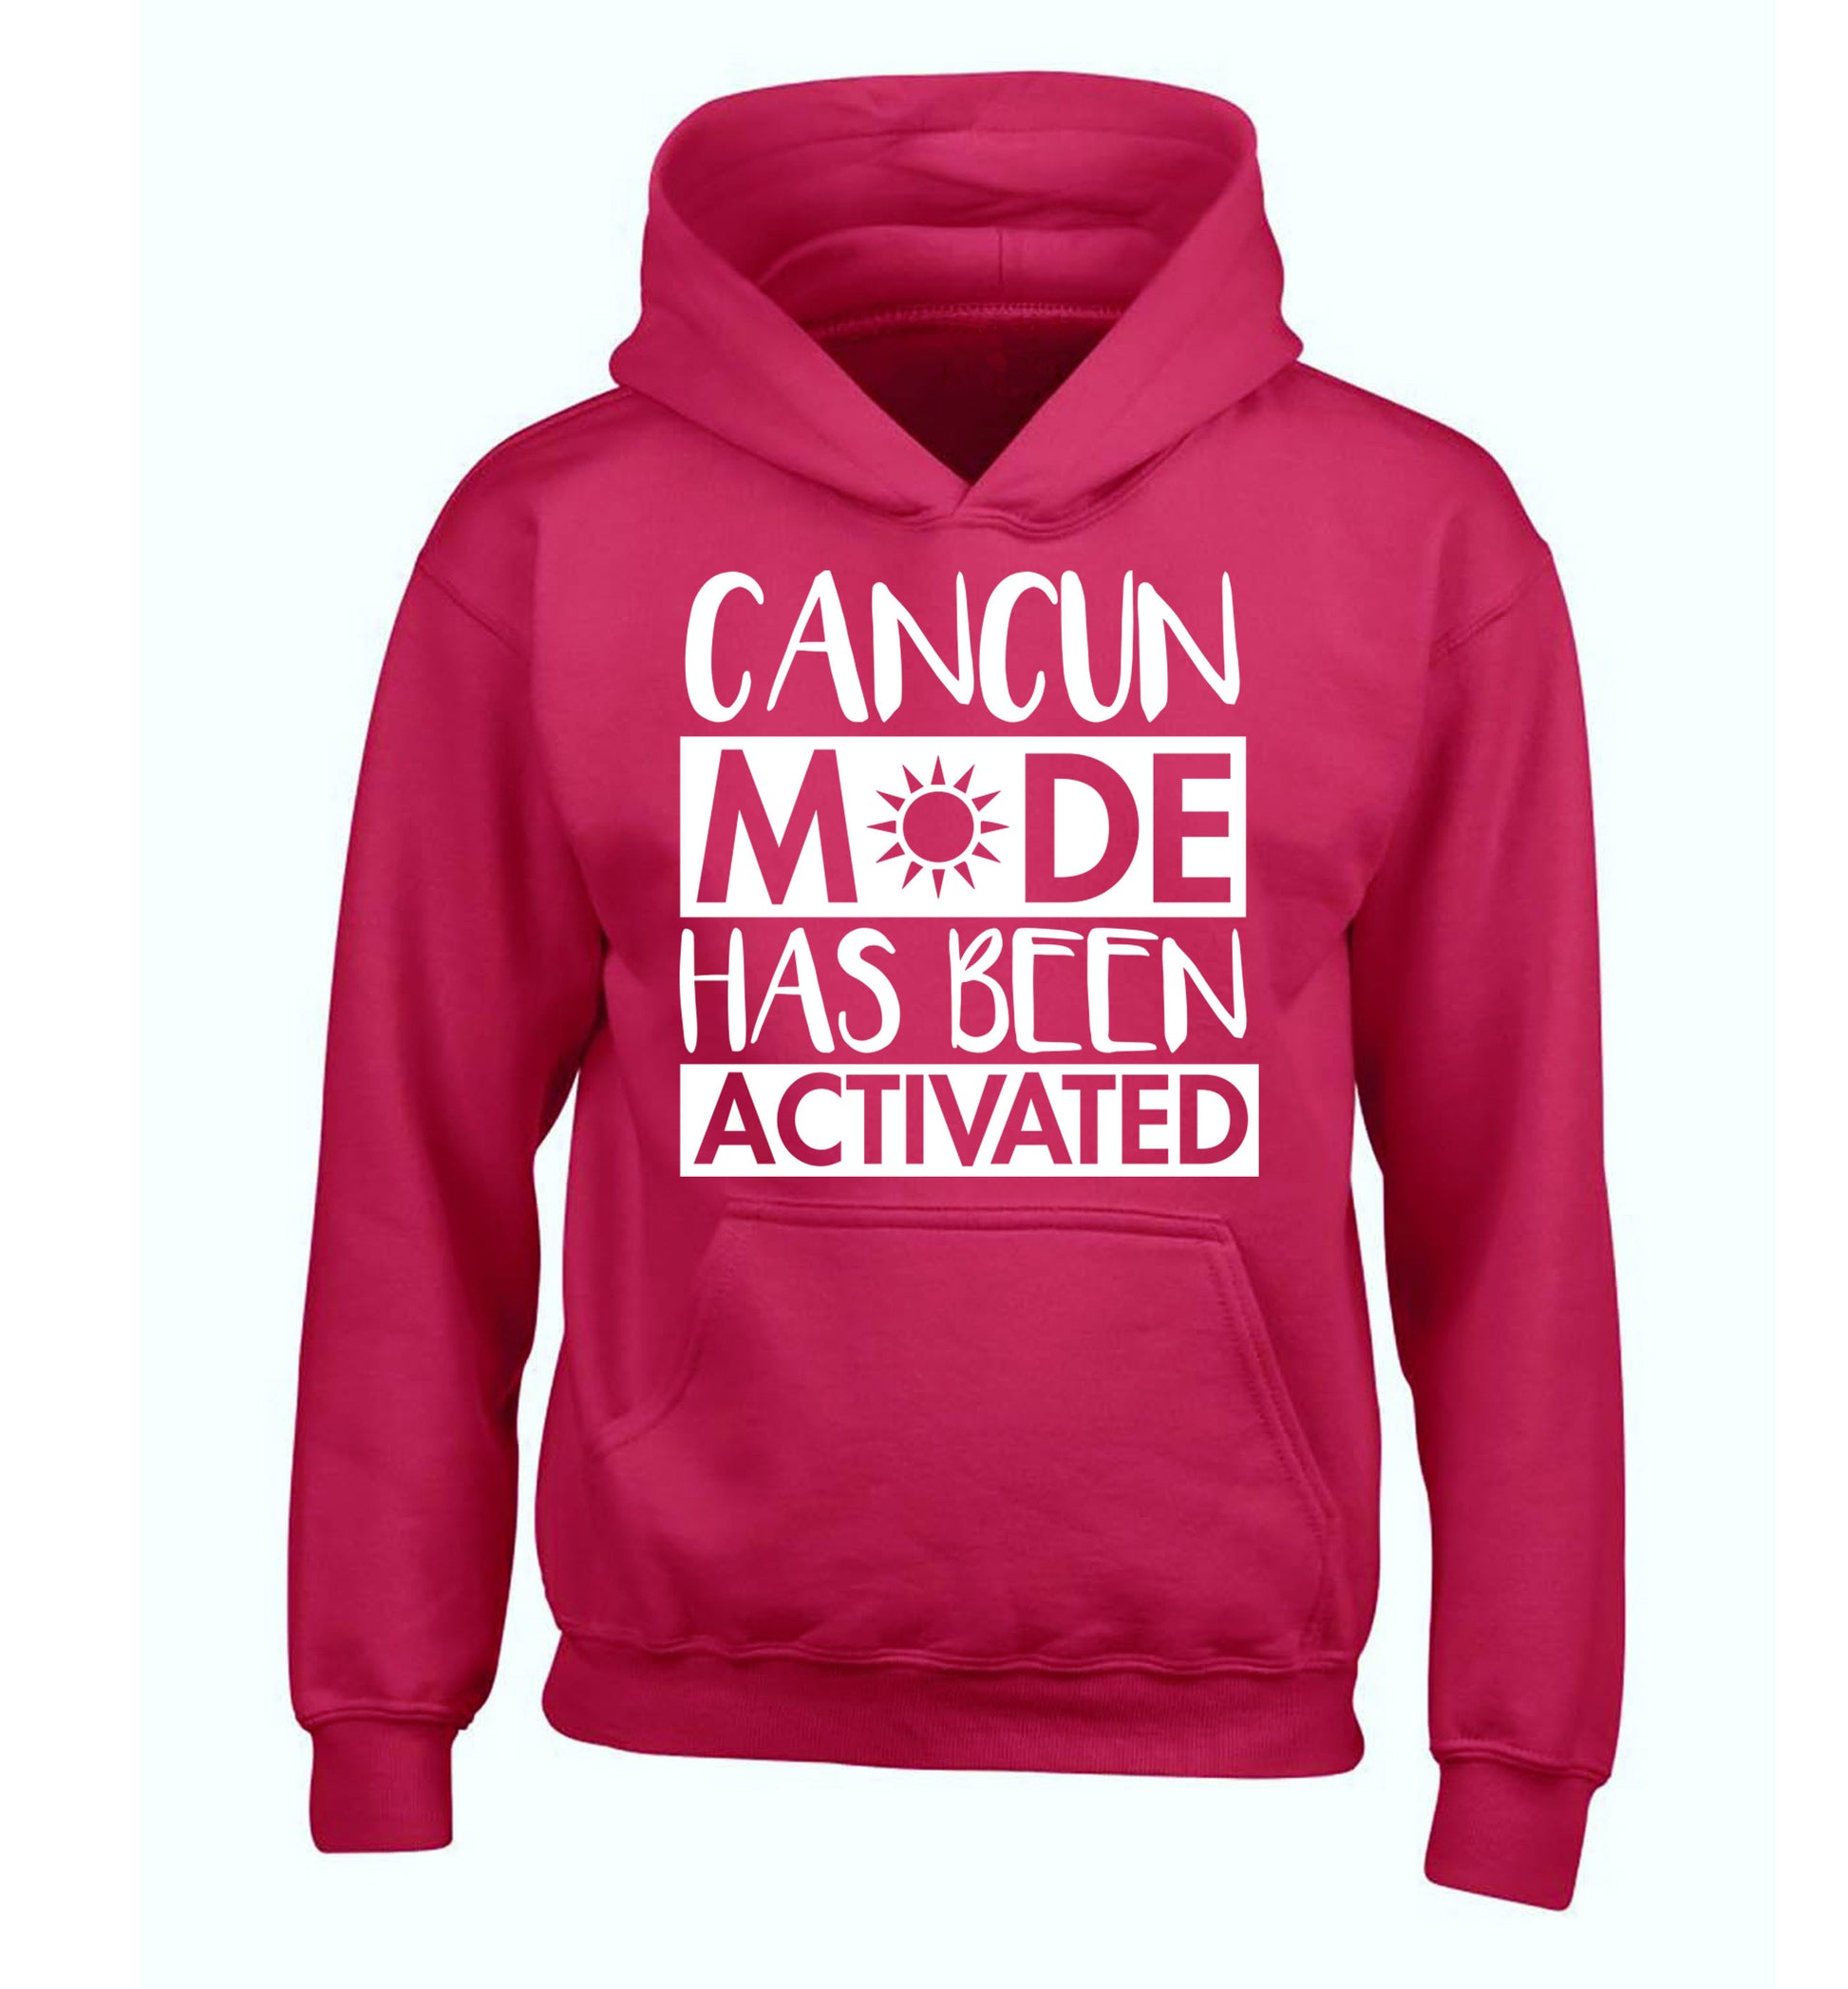 Cancun mode has been activated children's pink hoodie 12-14 Years